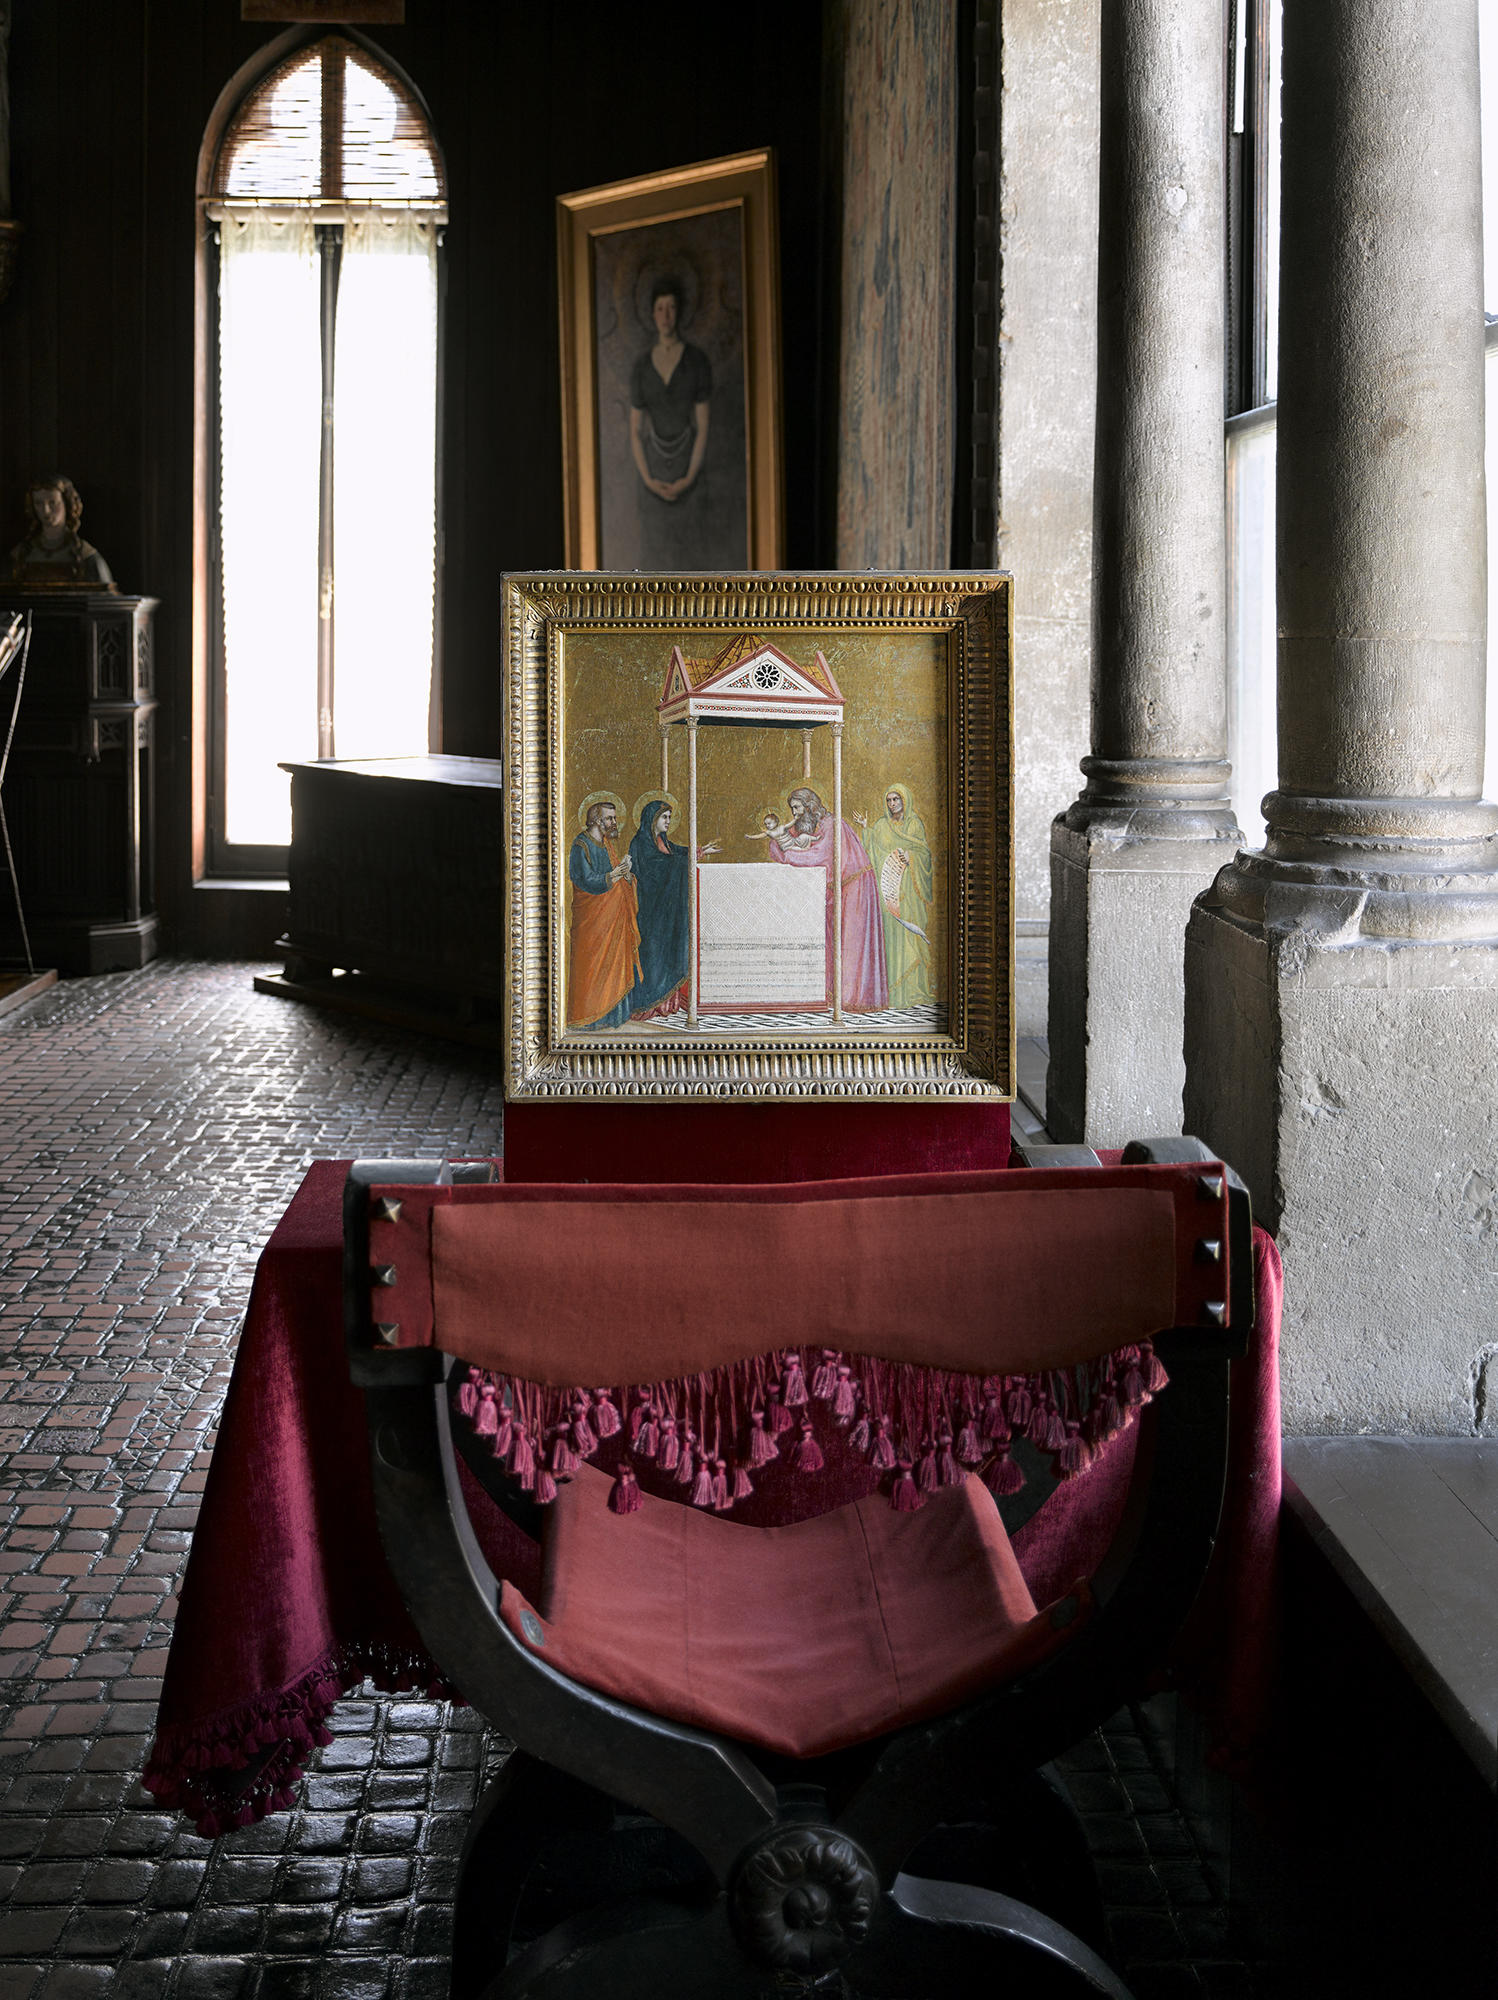  A small Italian Renaissance painting with a gold background on an easel in front of a chair upholstered in red velvet.